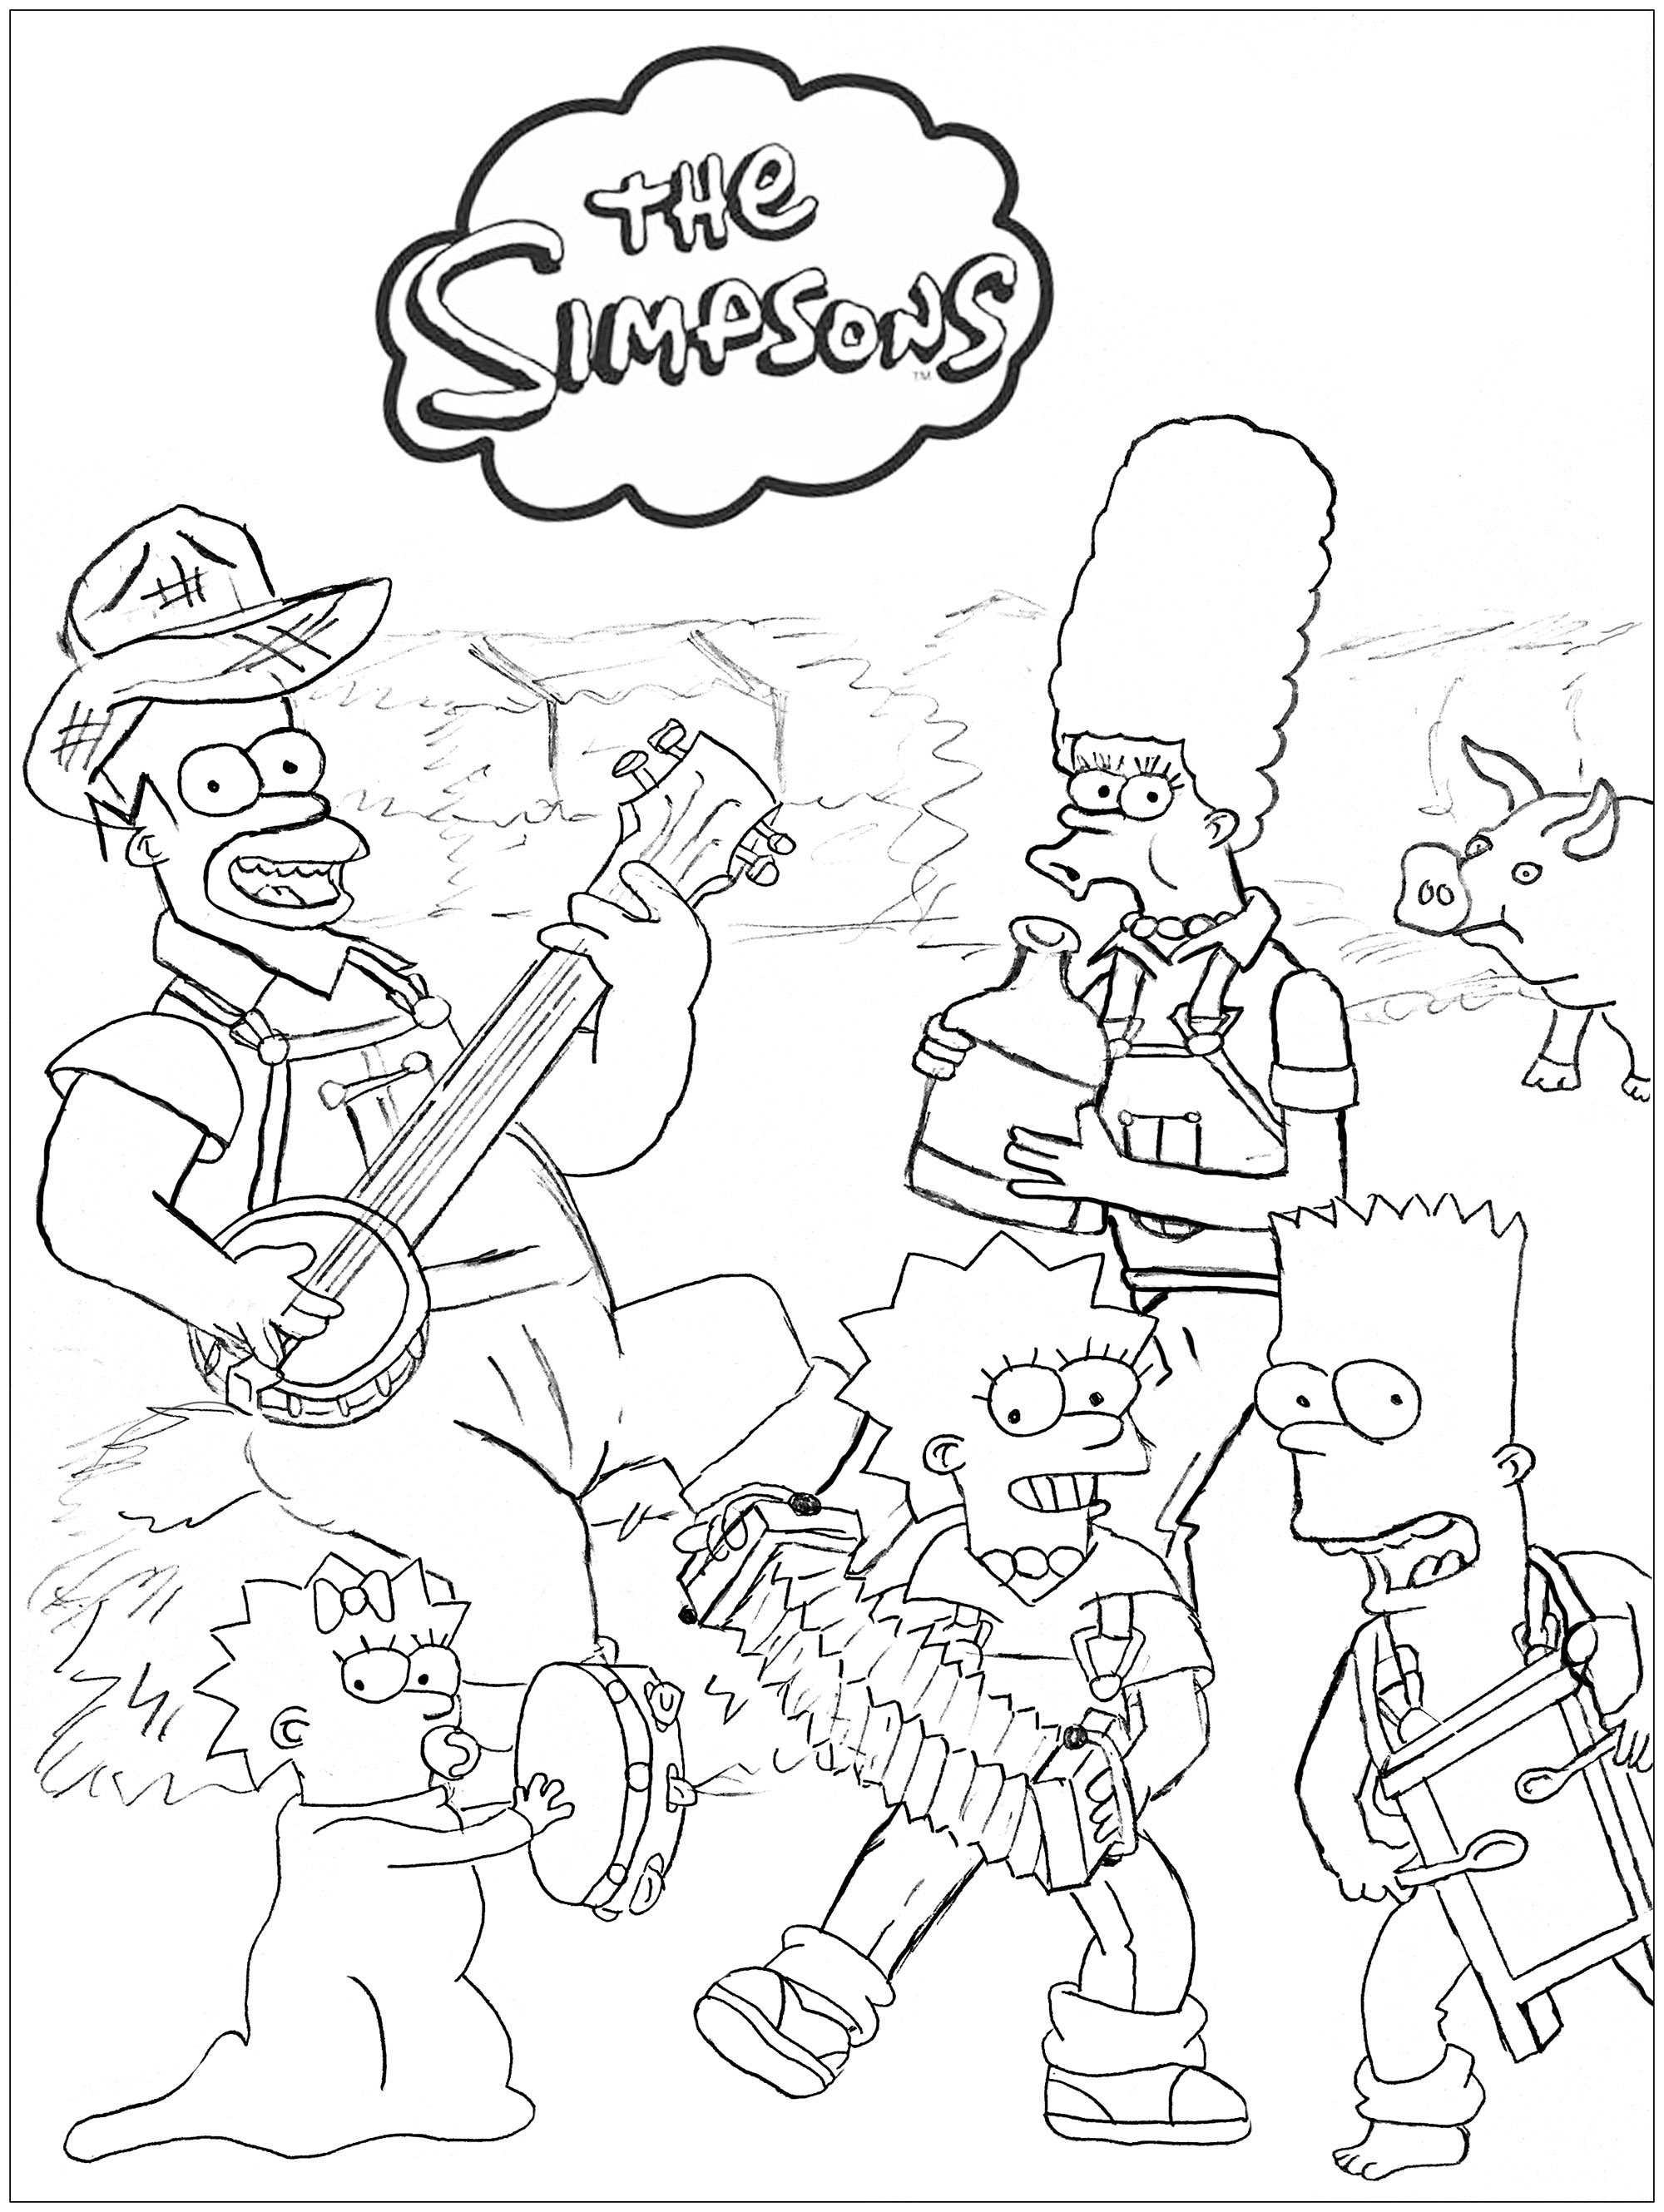 Image of The Simpsons to print and color The Simpsons Kids Coloring Pages